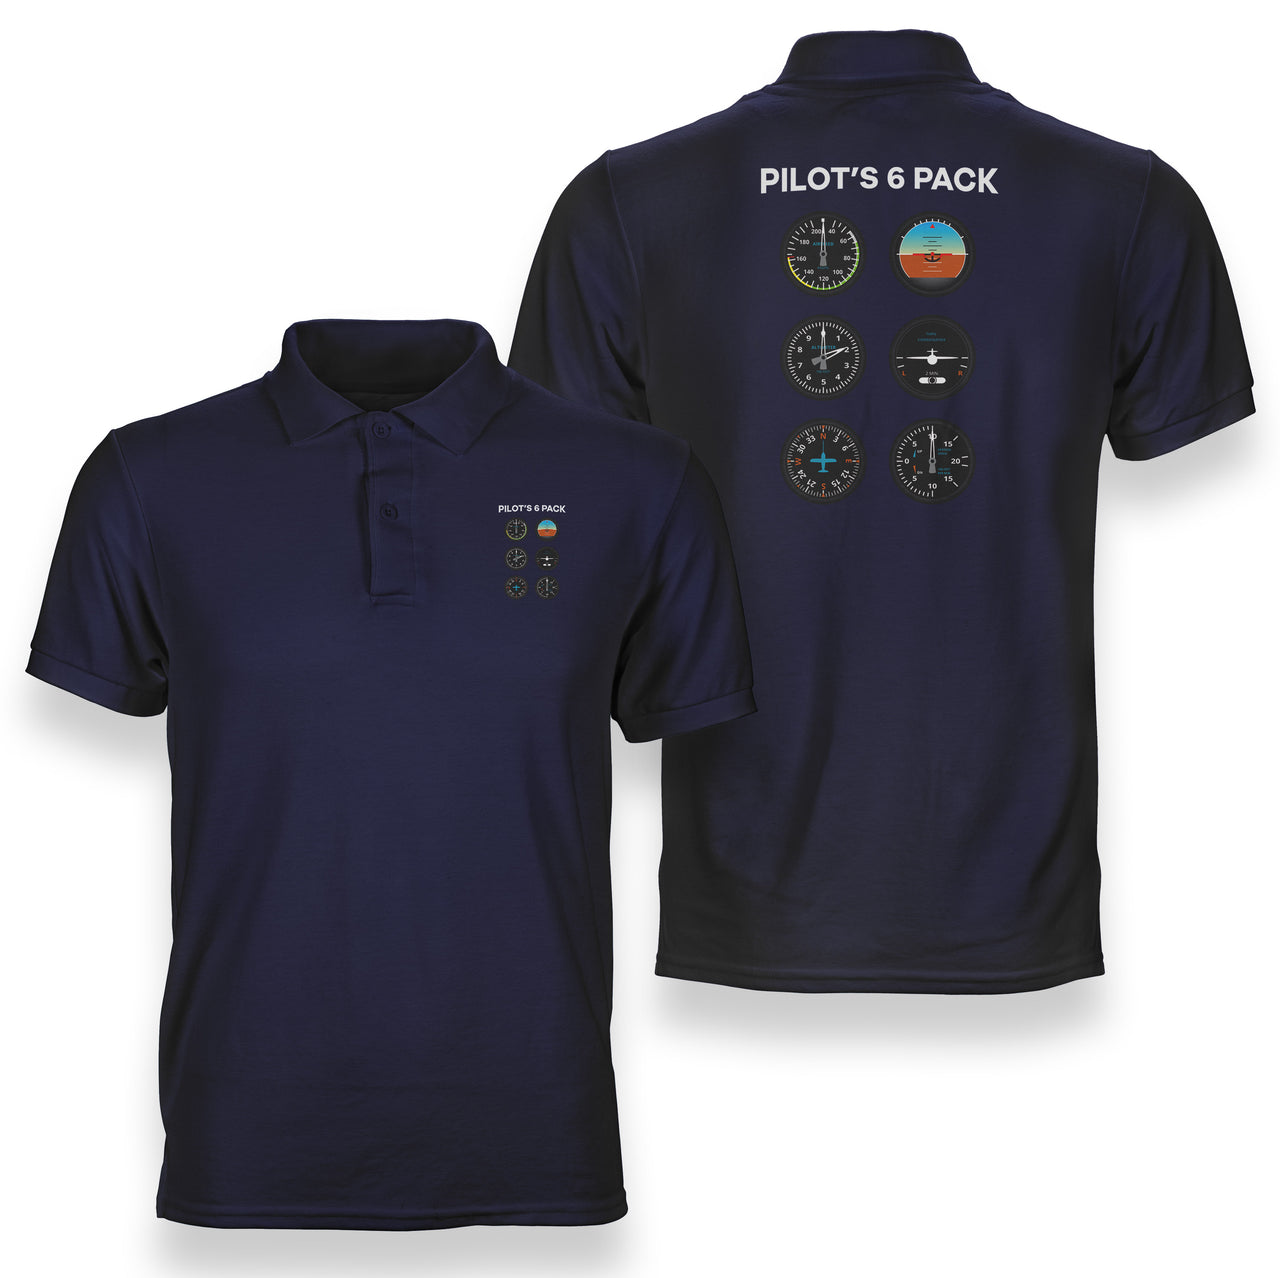 Pilot's 6 Pack Designed Double Side Polo T-Shirts